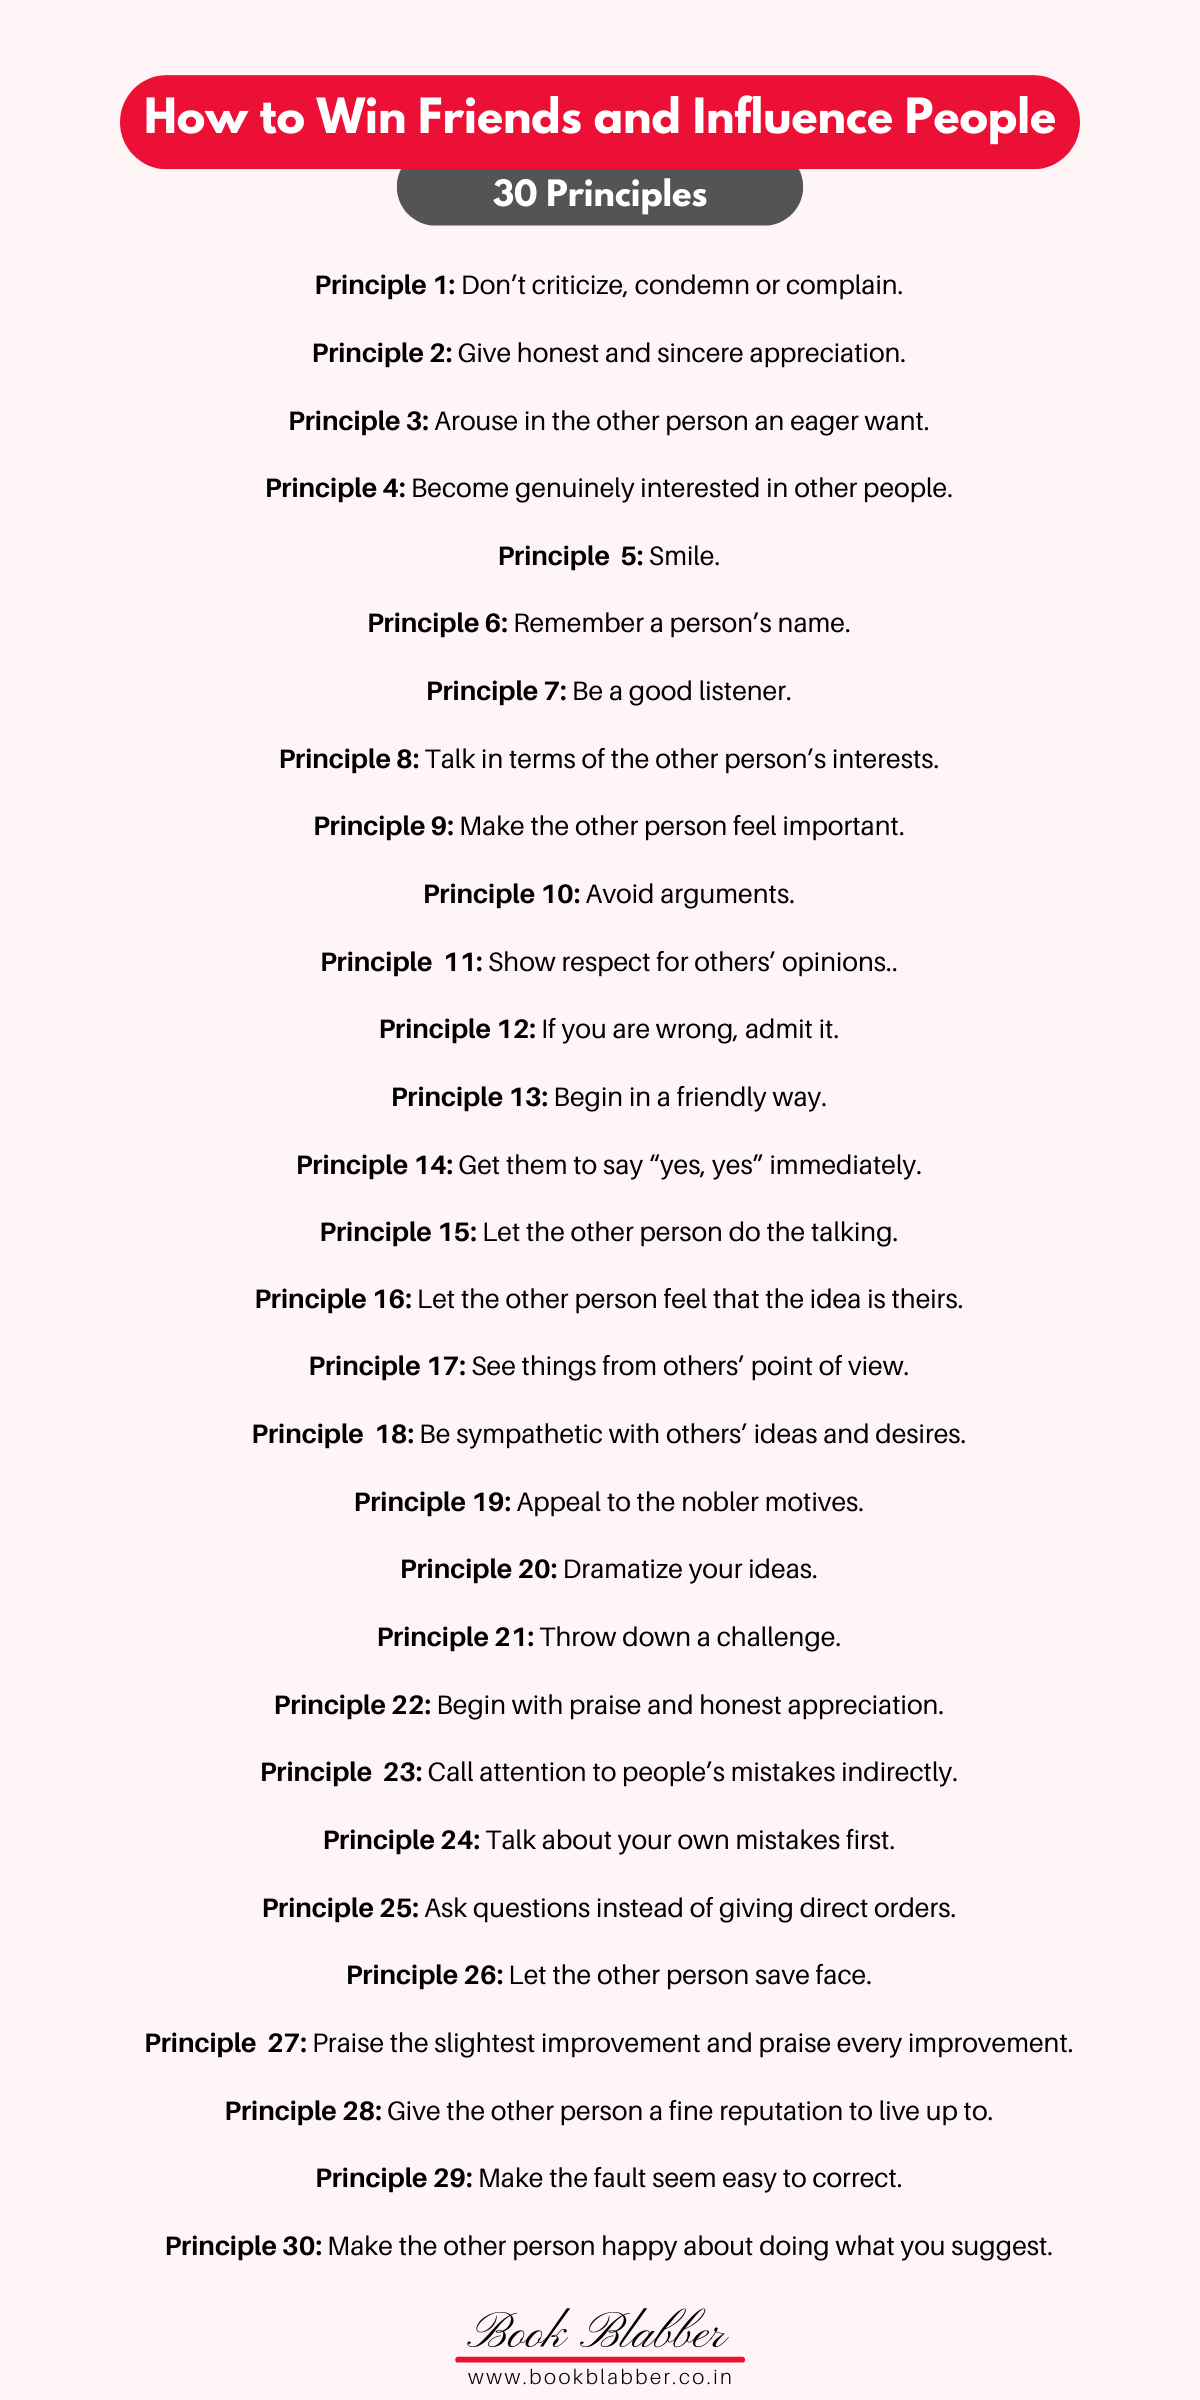 30 Principles from How to Win Friends and Influence People Book Image